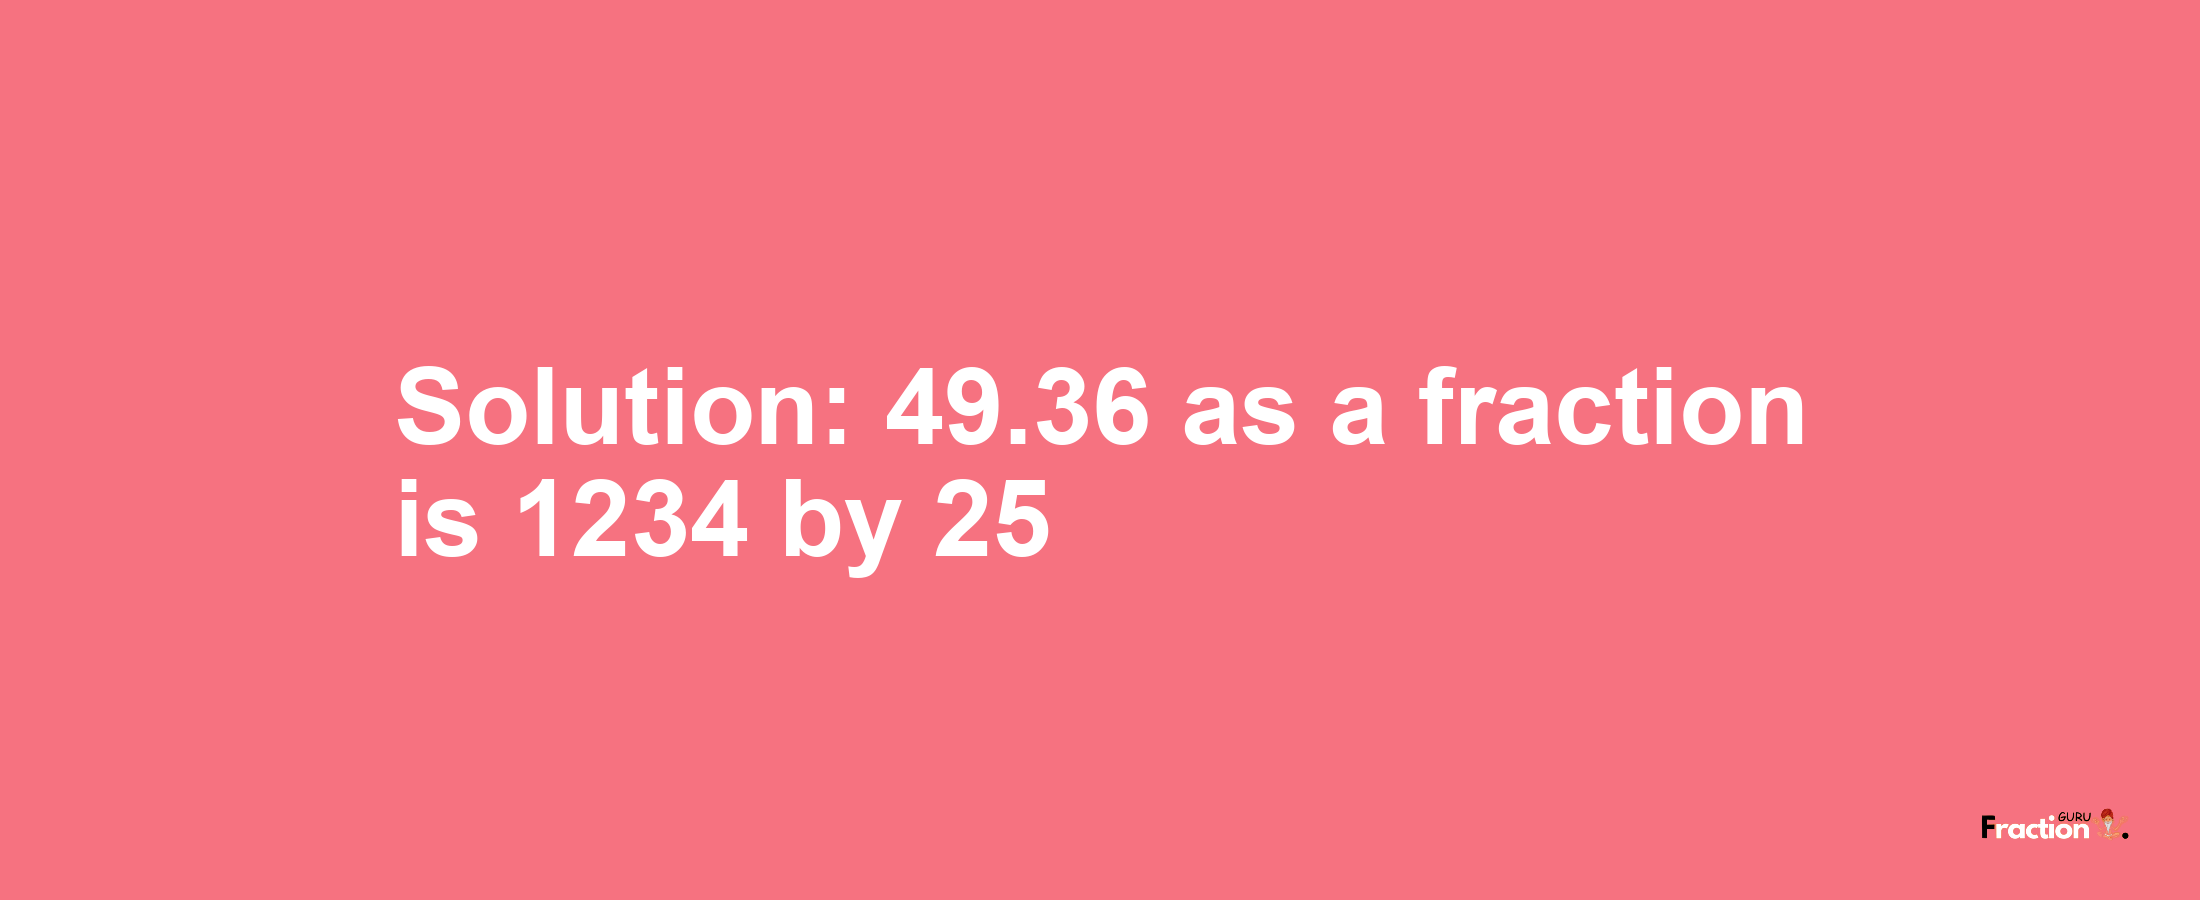 Solution:49.36 as a fraction is 1234/25